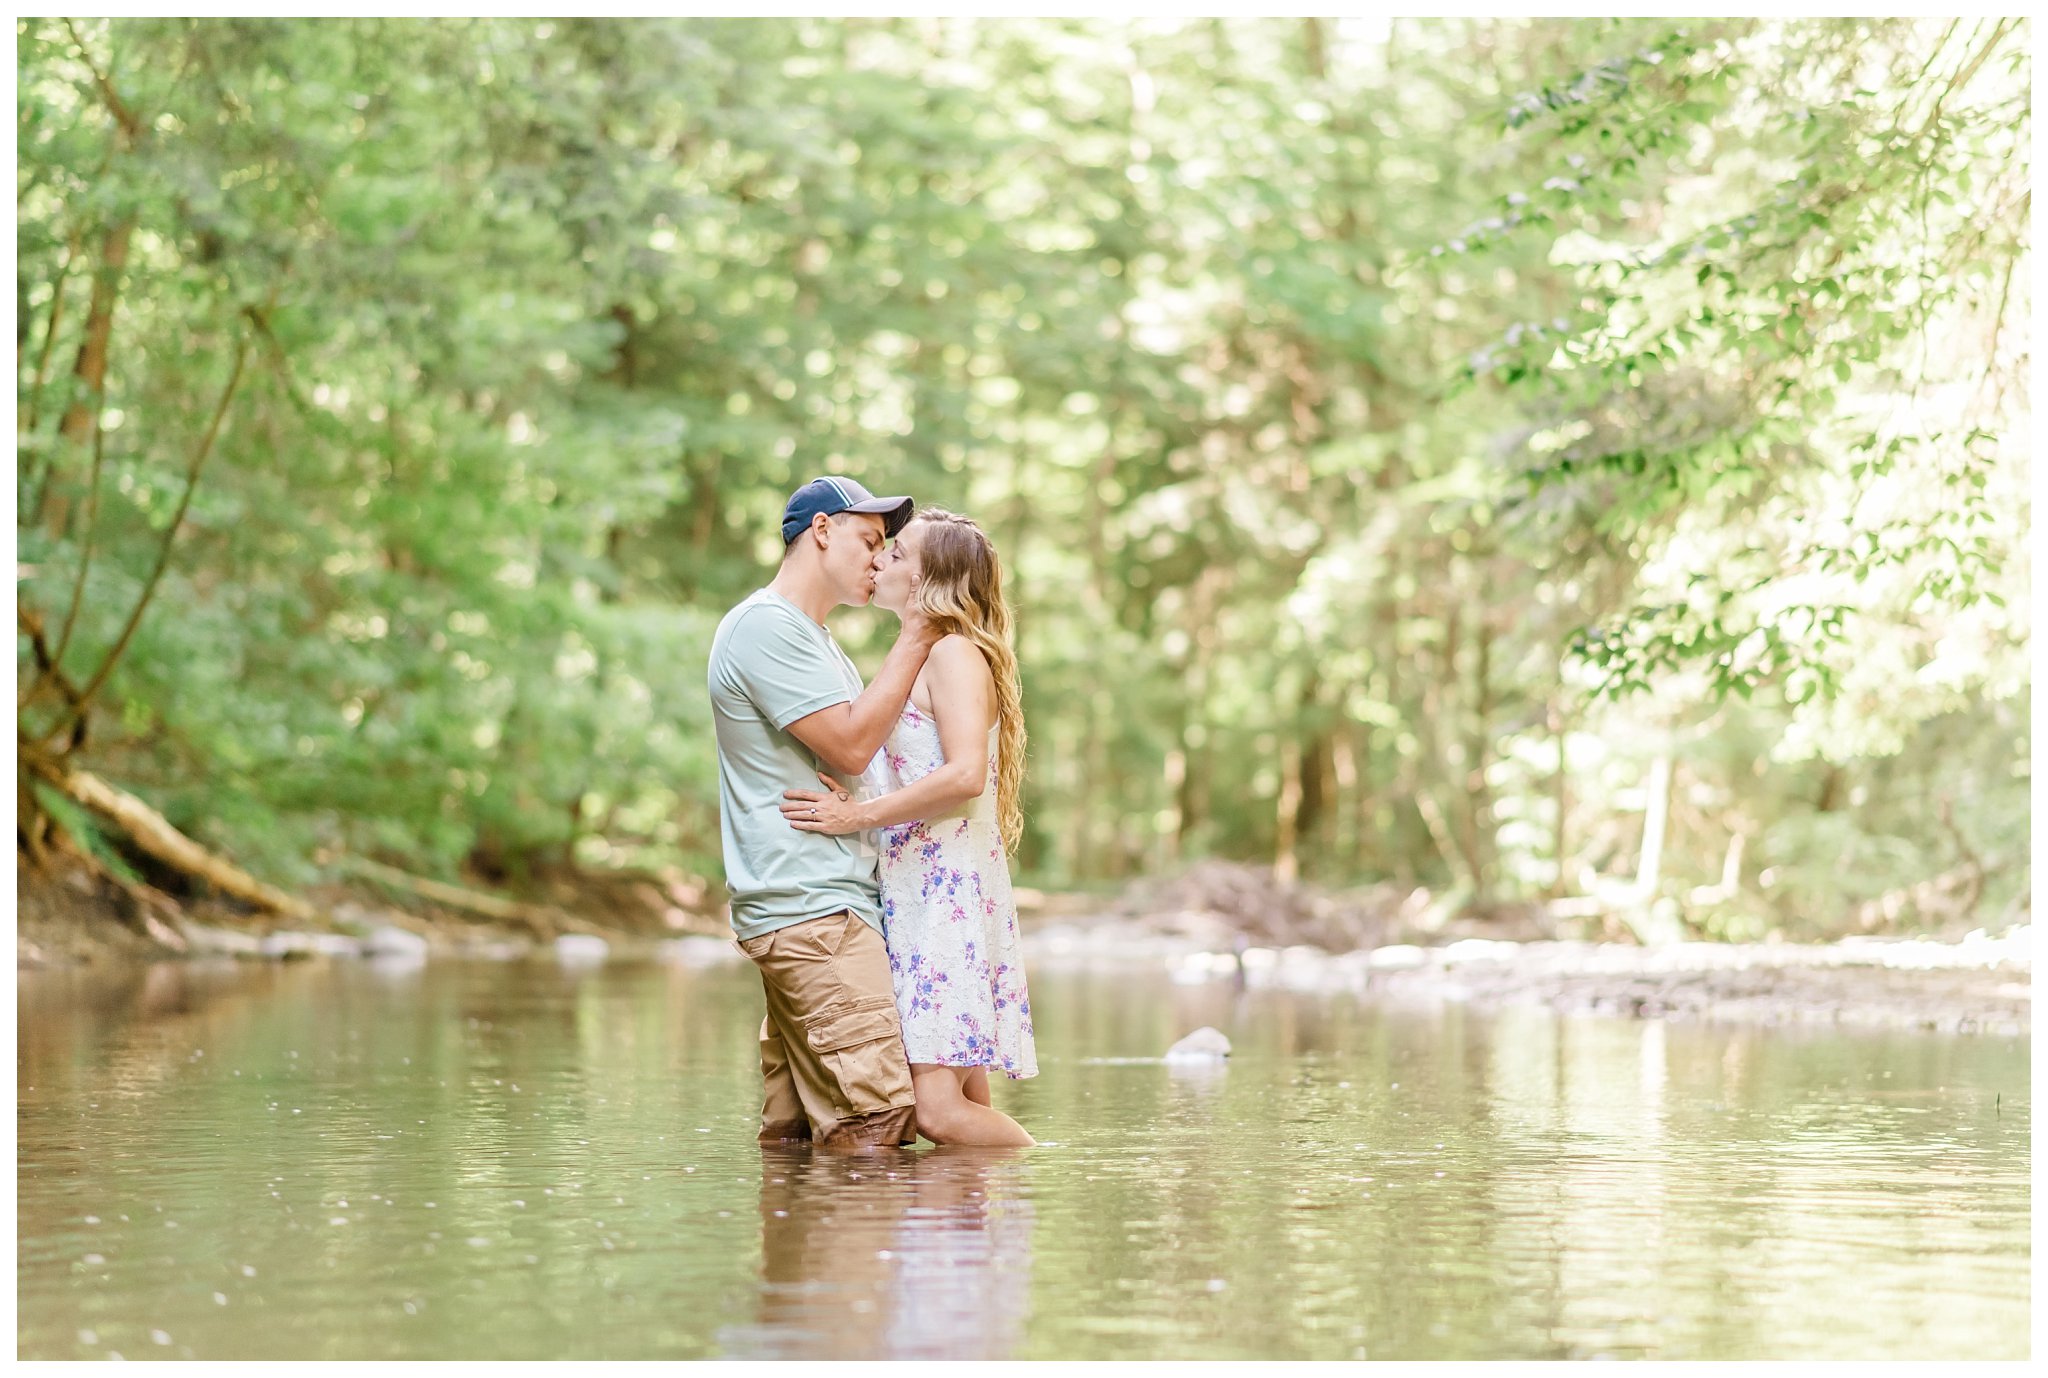 Joanna Young Photography Elizabeth and Cody Engagement Session_0001.jpg